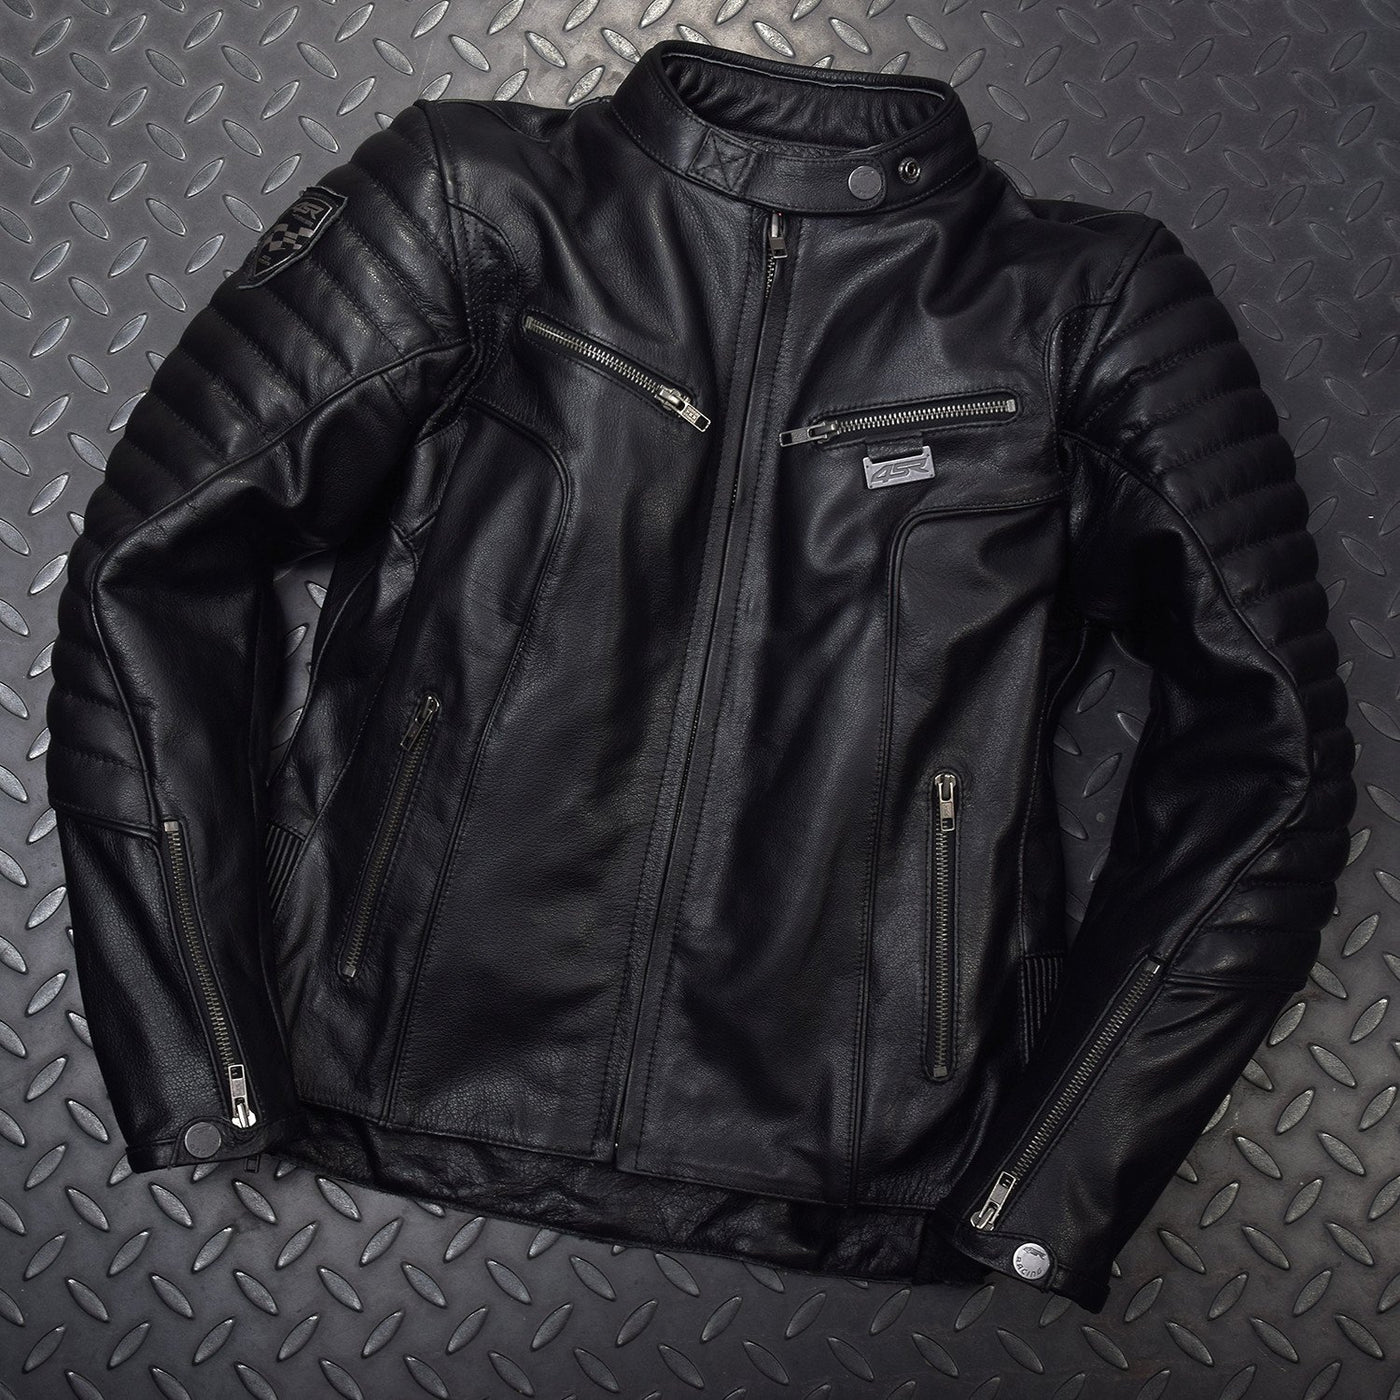 Motorcycle jacket for women - B Monster Lady